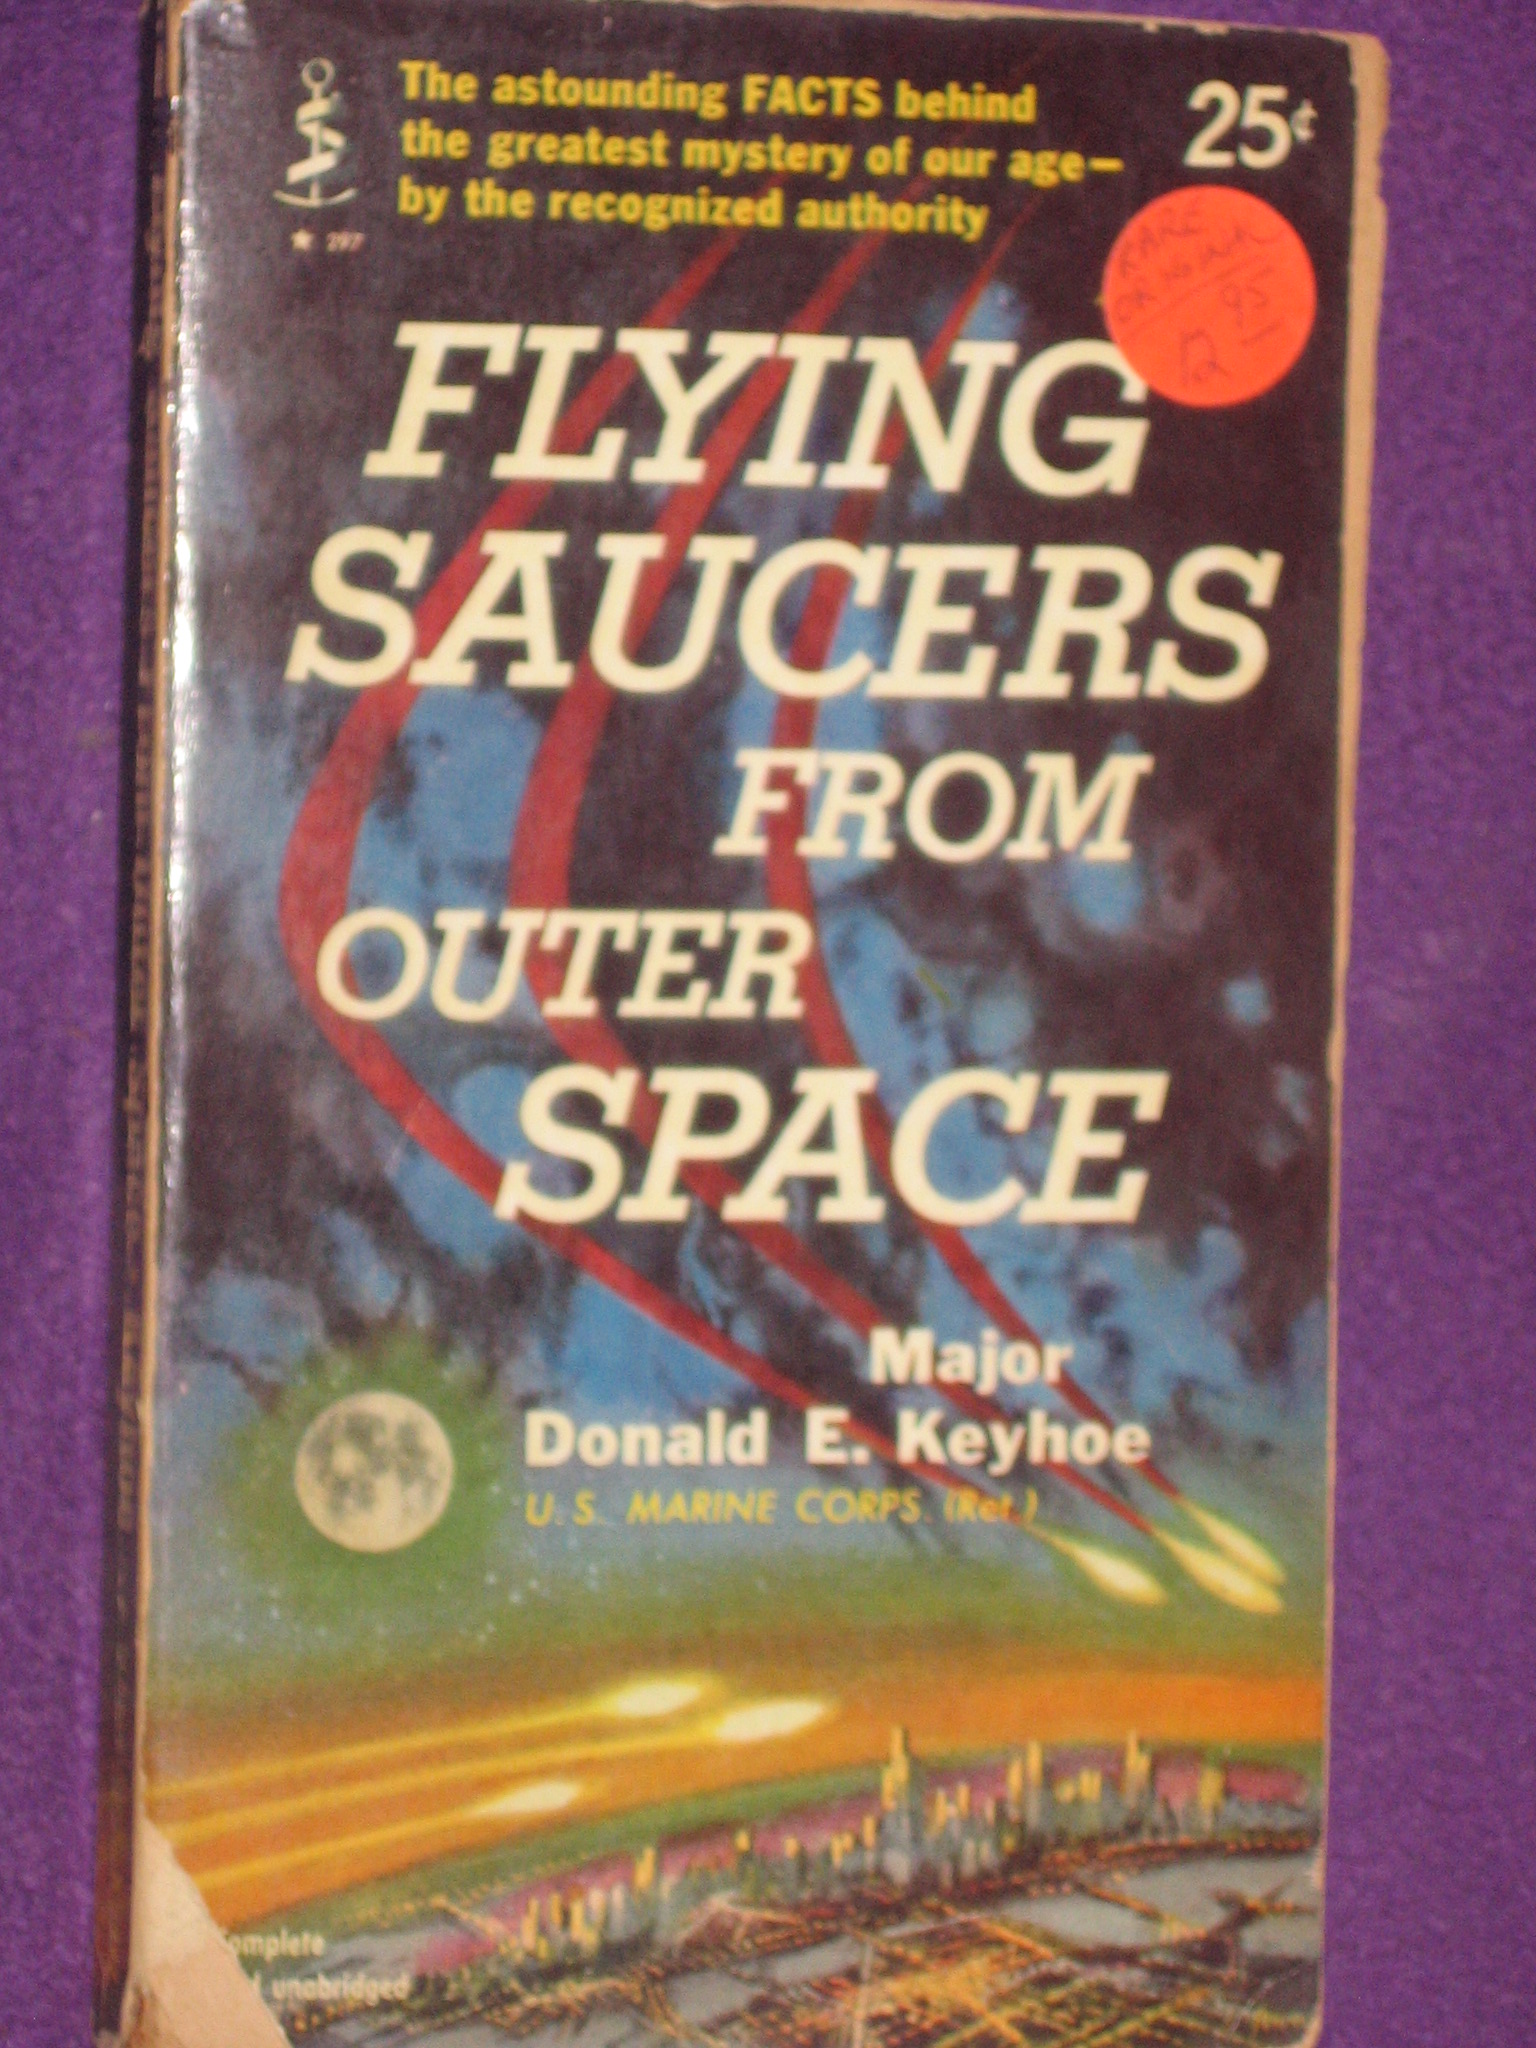 The first published book to use the term “UFO” was Donald E. Keyhoe’s 1953 book, Flying Saucers from Outer Space.